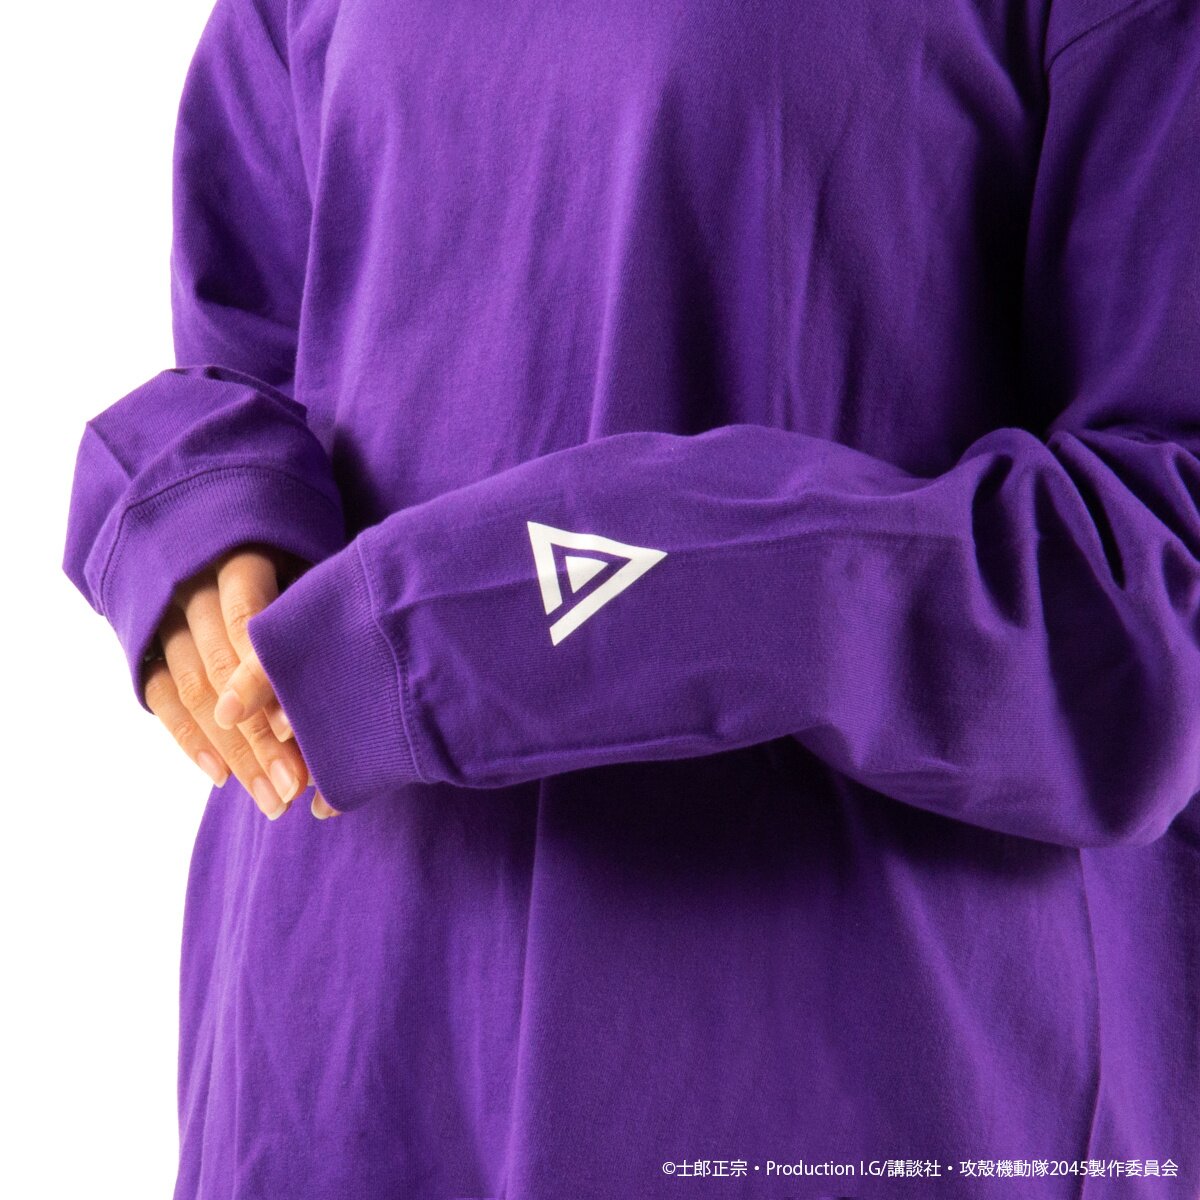 Ghost in the Shell: SAC_2045 Purple Long Sleeve T-Shirt